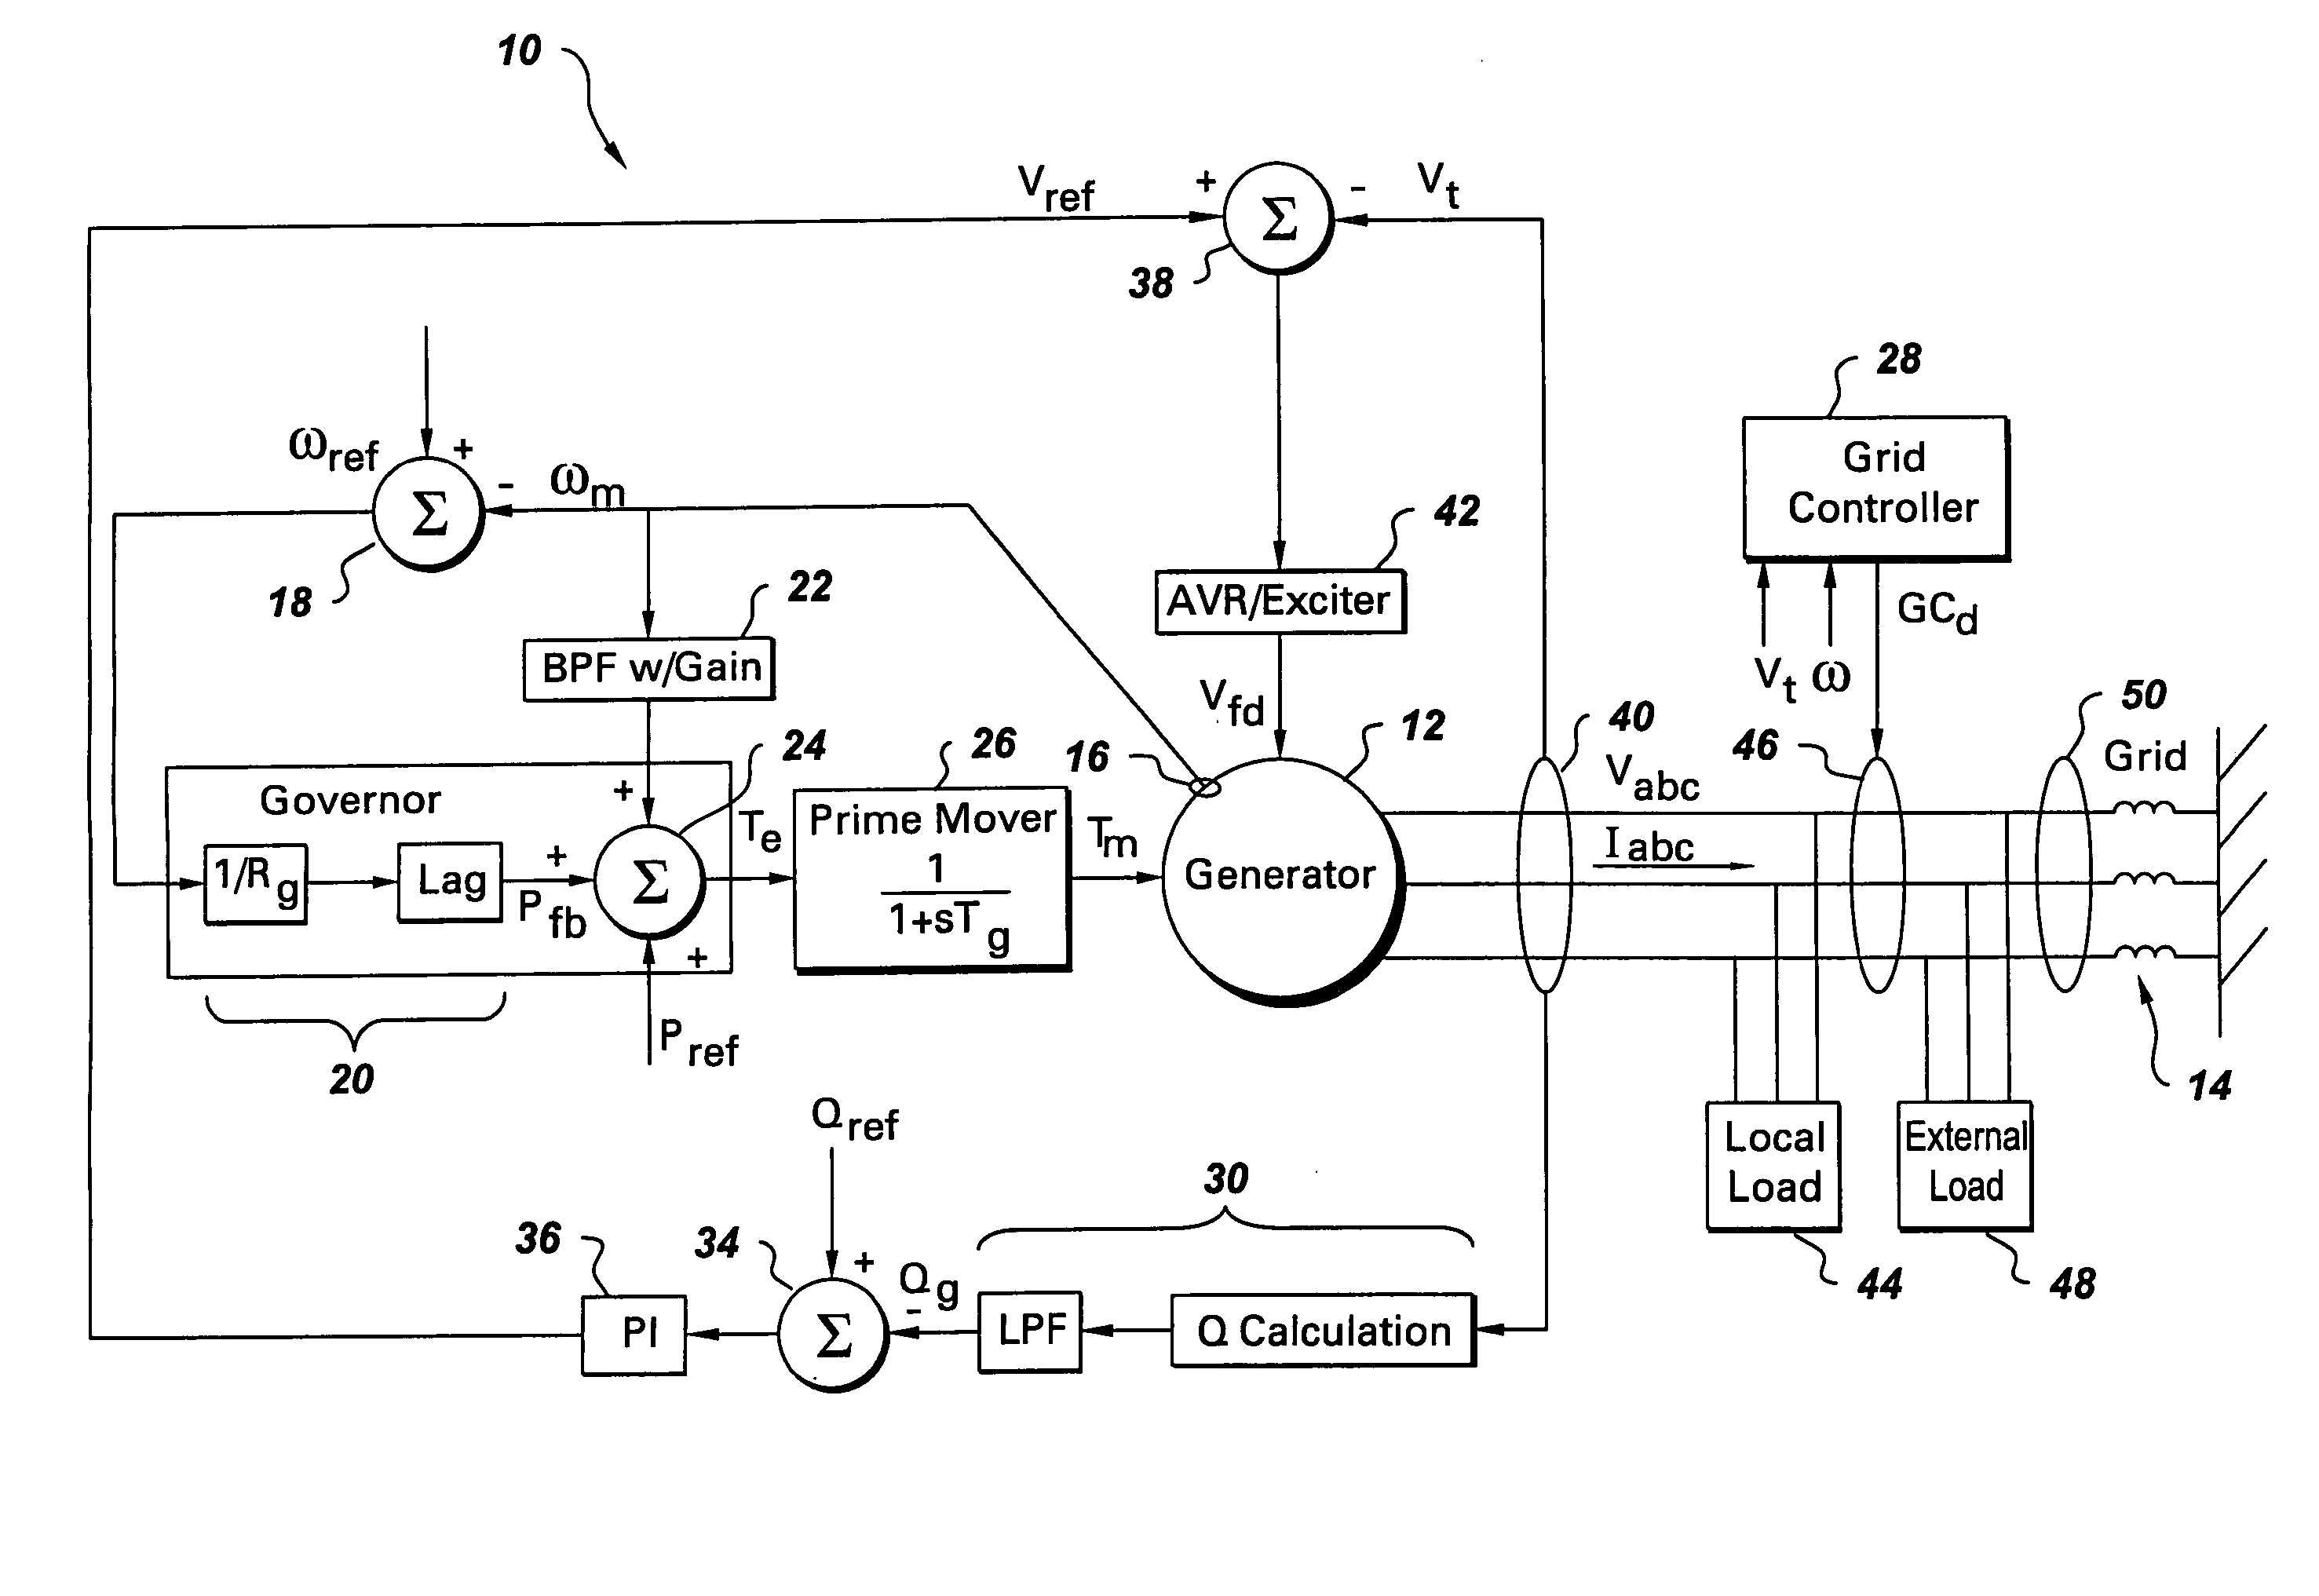 Anti-islanding protection systems for synchronous machine based distributed generators